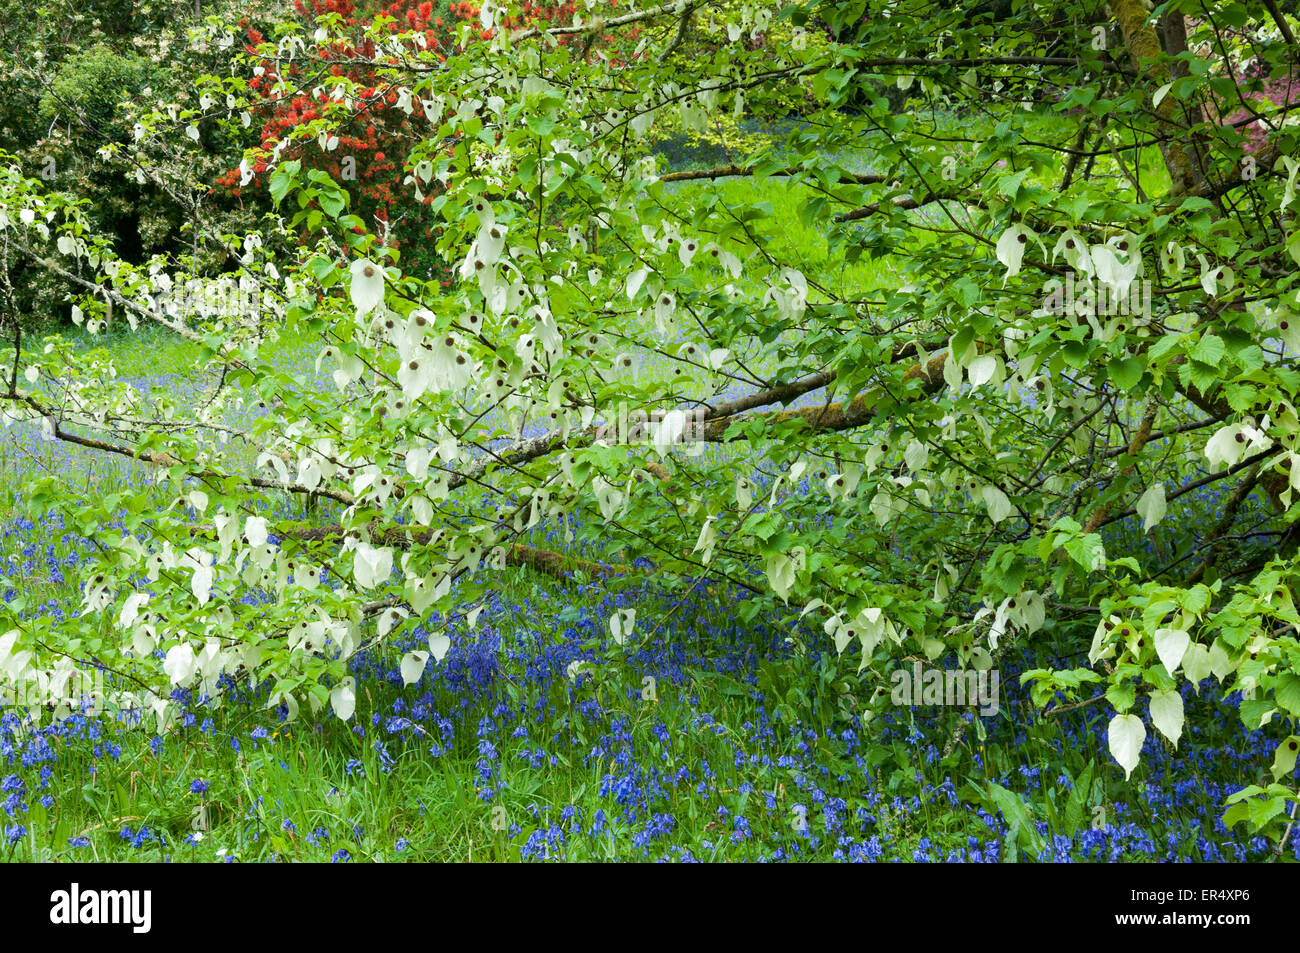 Davidia Involucrata, otherwise known as the Dove tree or handkerchief tree. Bluebells growing growing beneath. Stock Photo